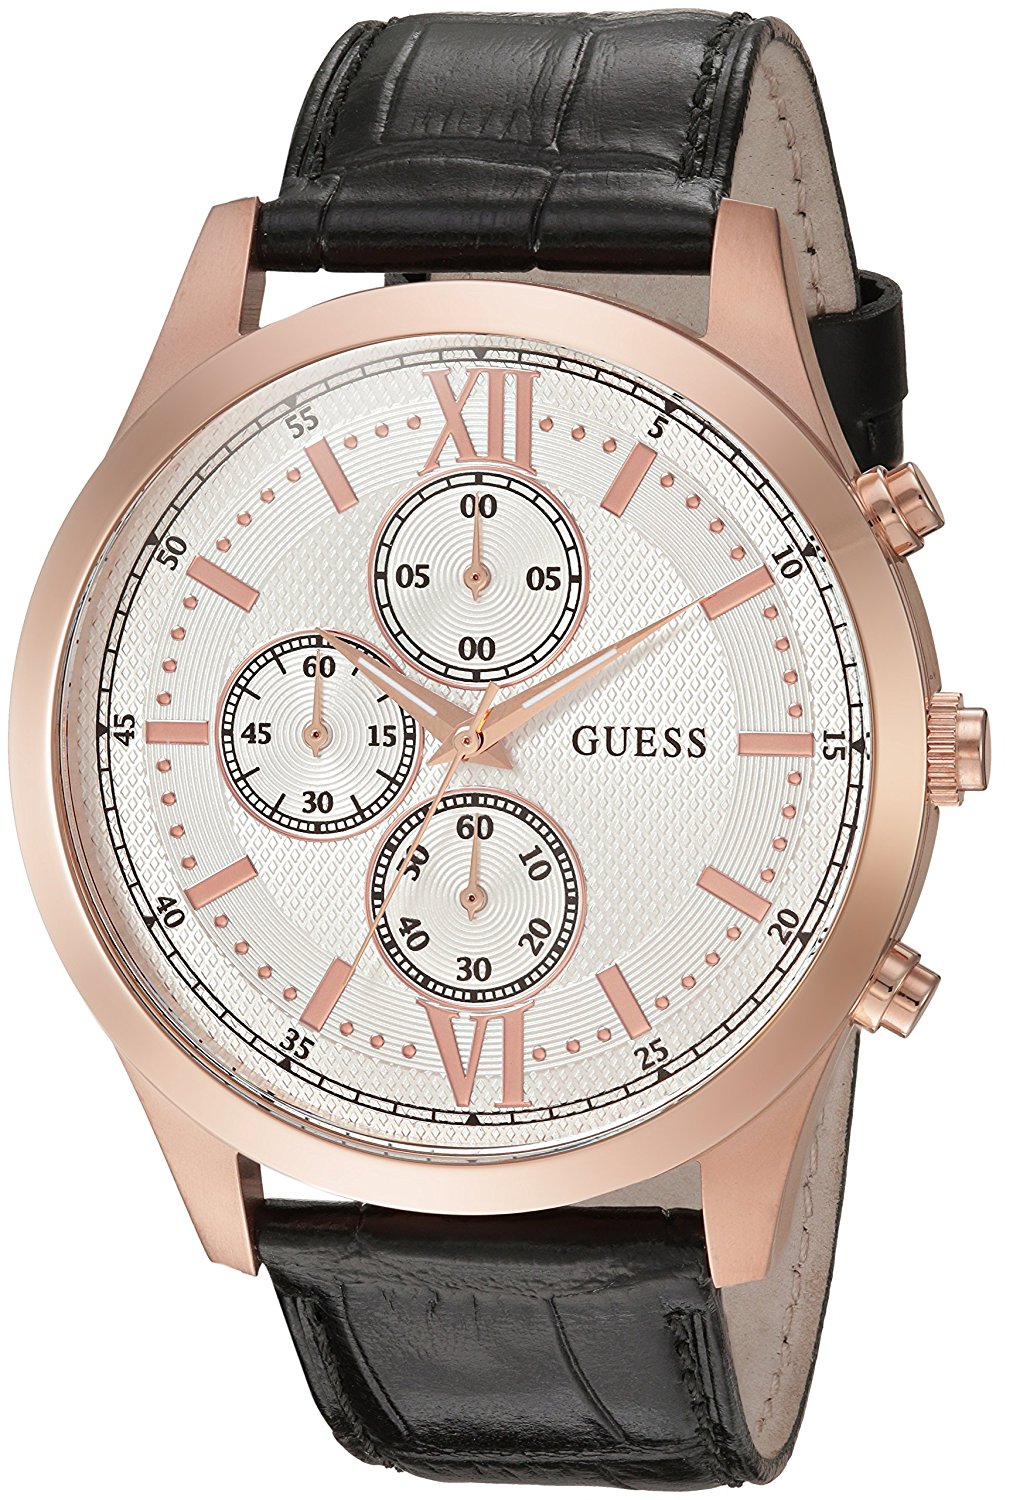 Đồng hồ GUESS Men's U0876G2 Dressy Stainless Steel Multi-Function Watch with Chronograph Dial and Genuine Leather Strap Buckle